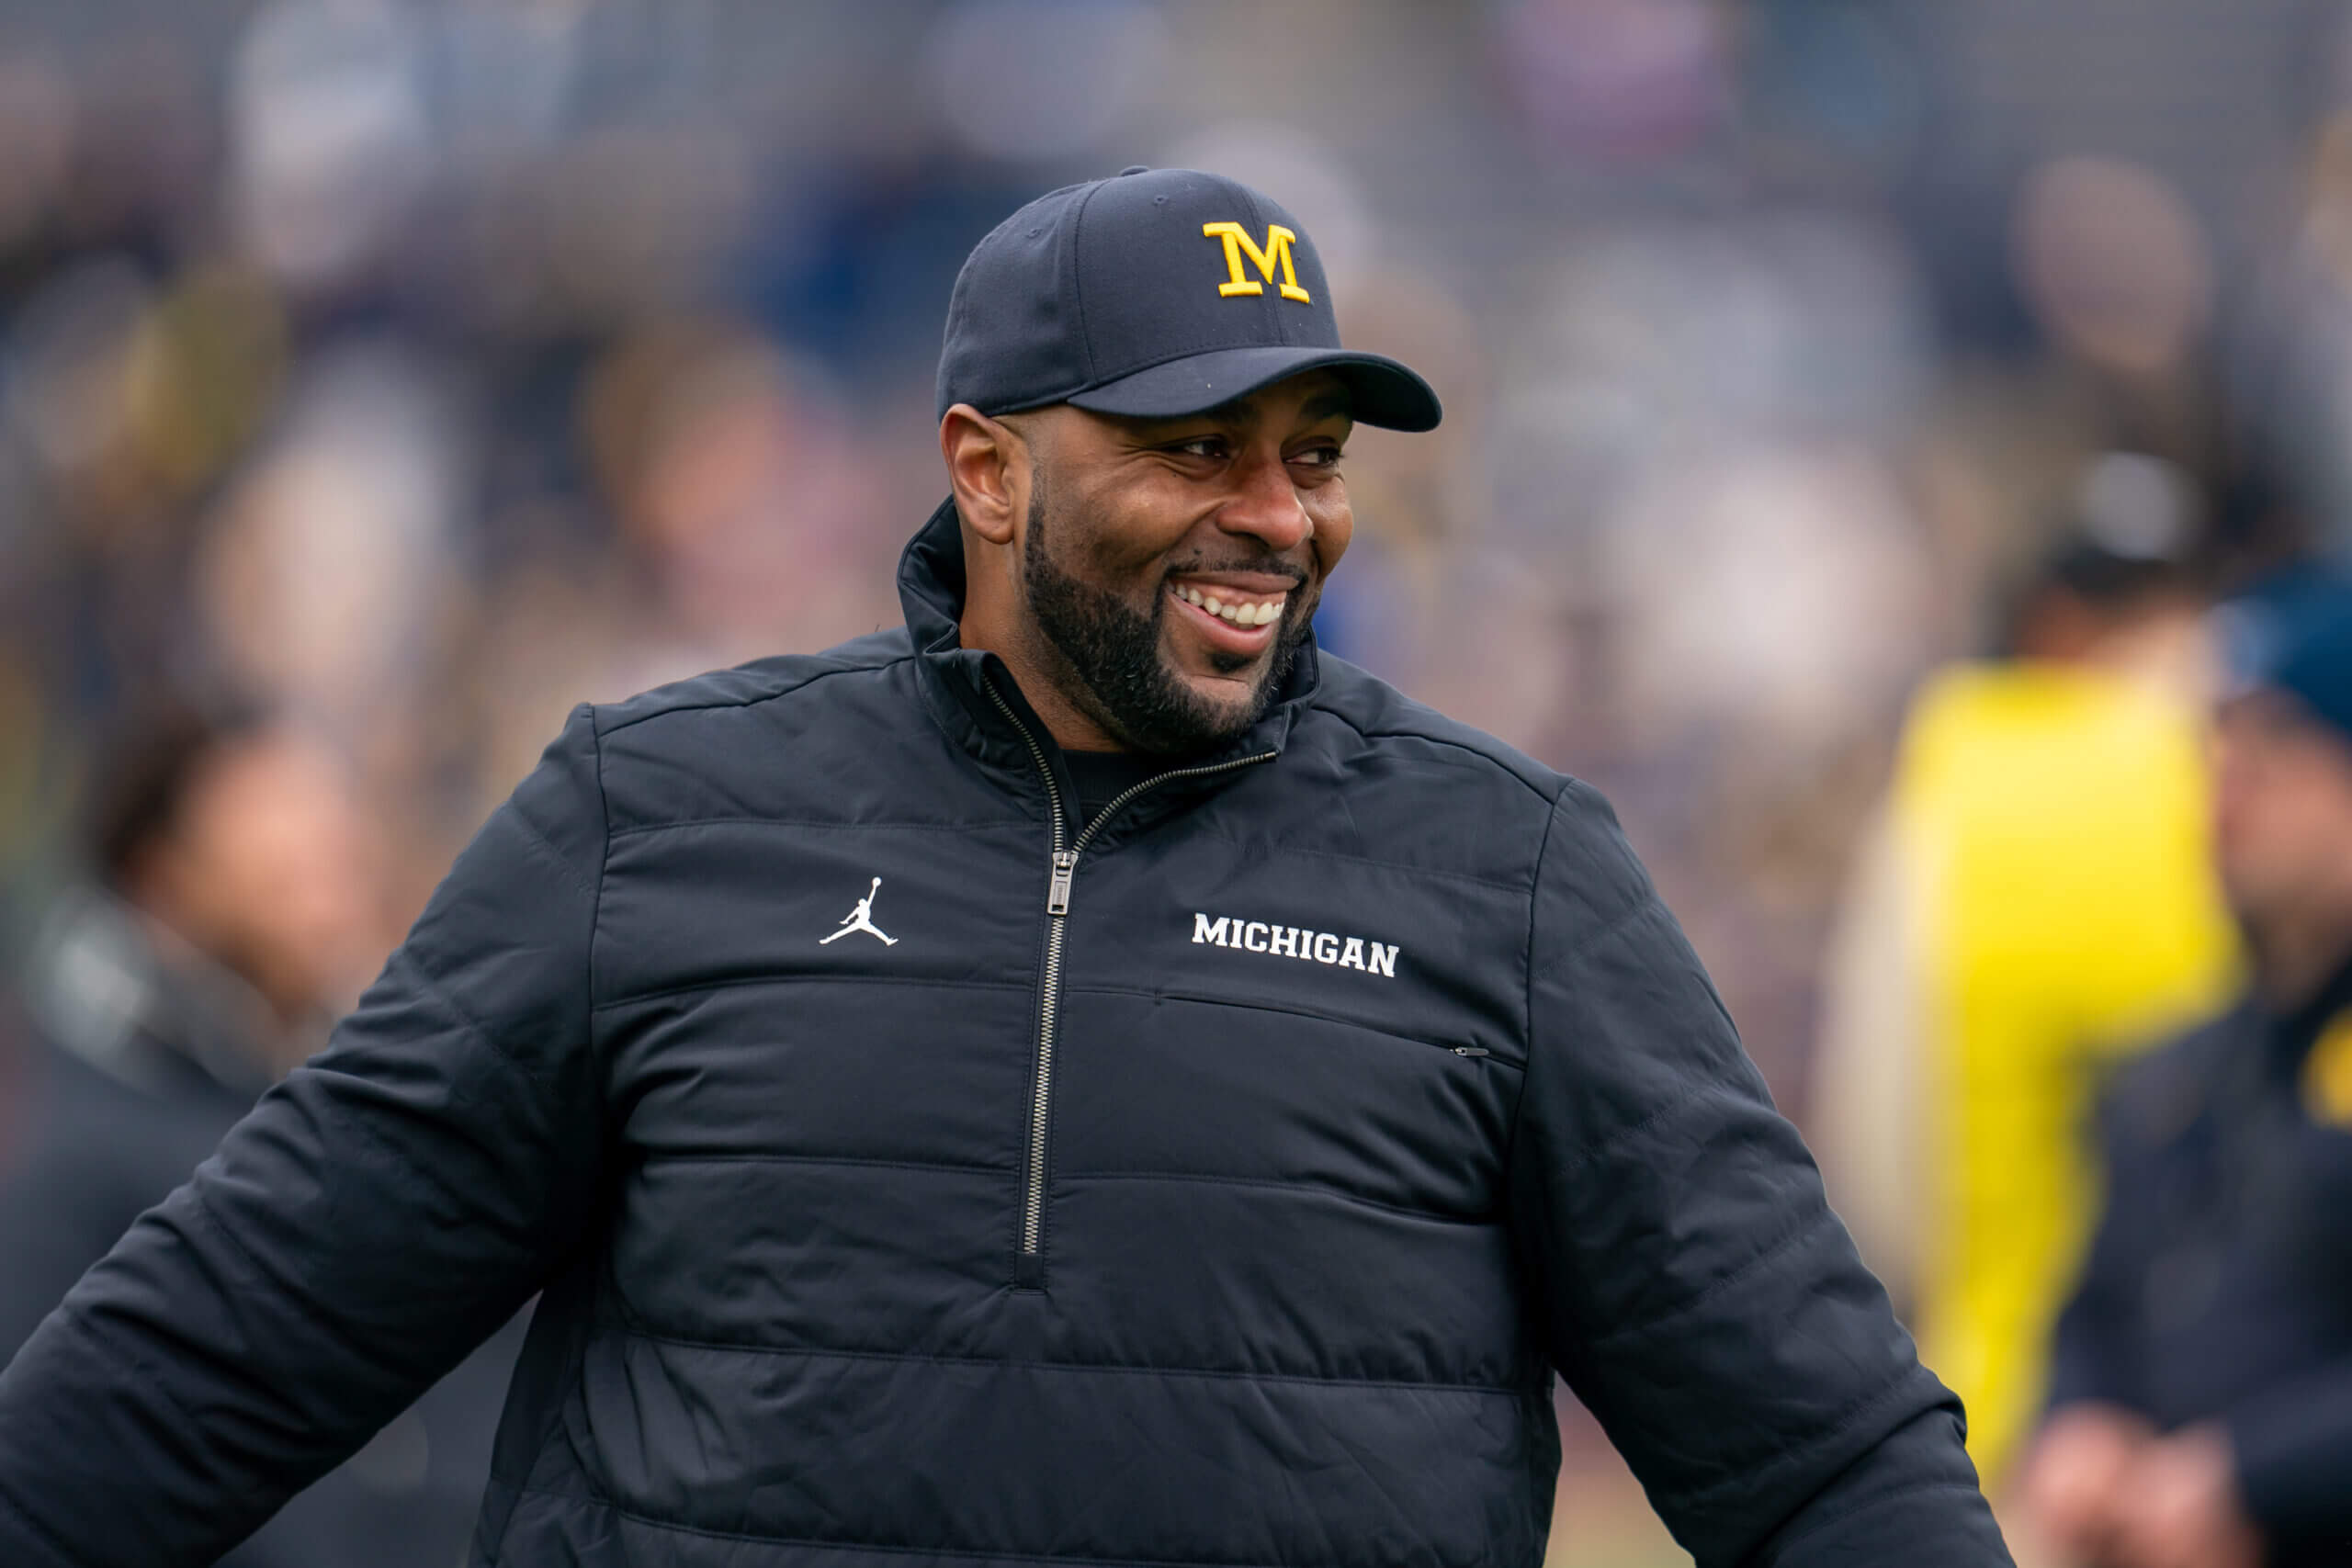 Nate Marshall commitment gives Michigan first recruiting win under Sherrone Moore